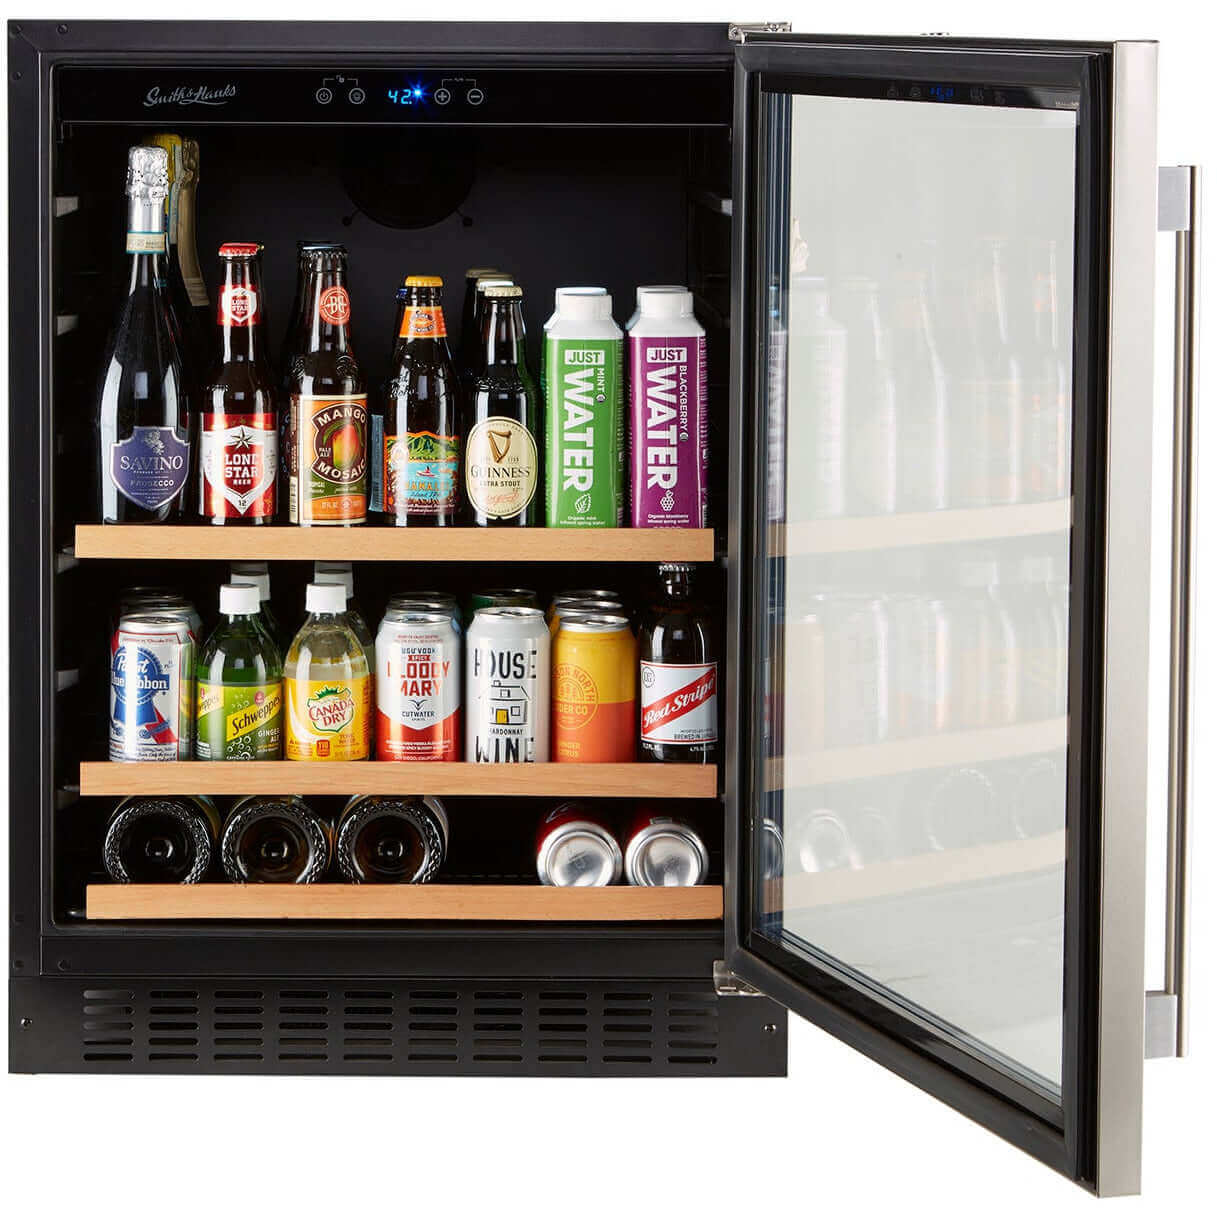 Smith & Hanks 176 Can Under Counter Beverage Cooler